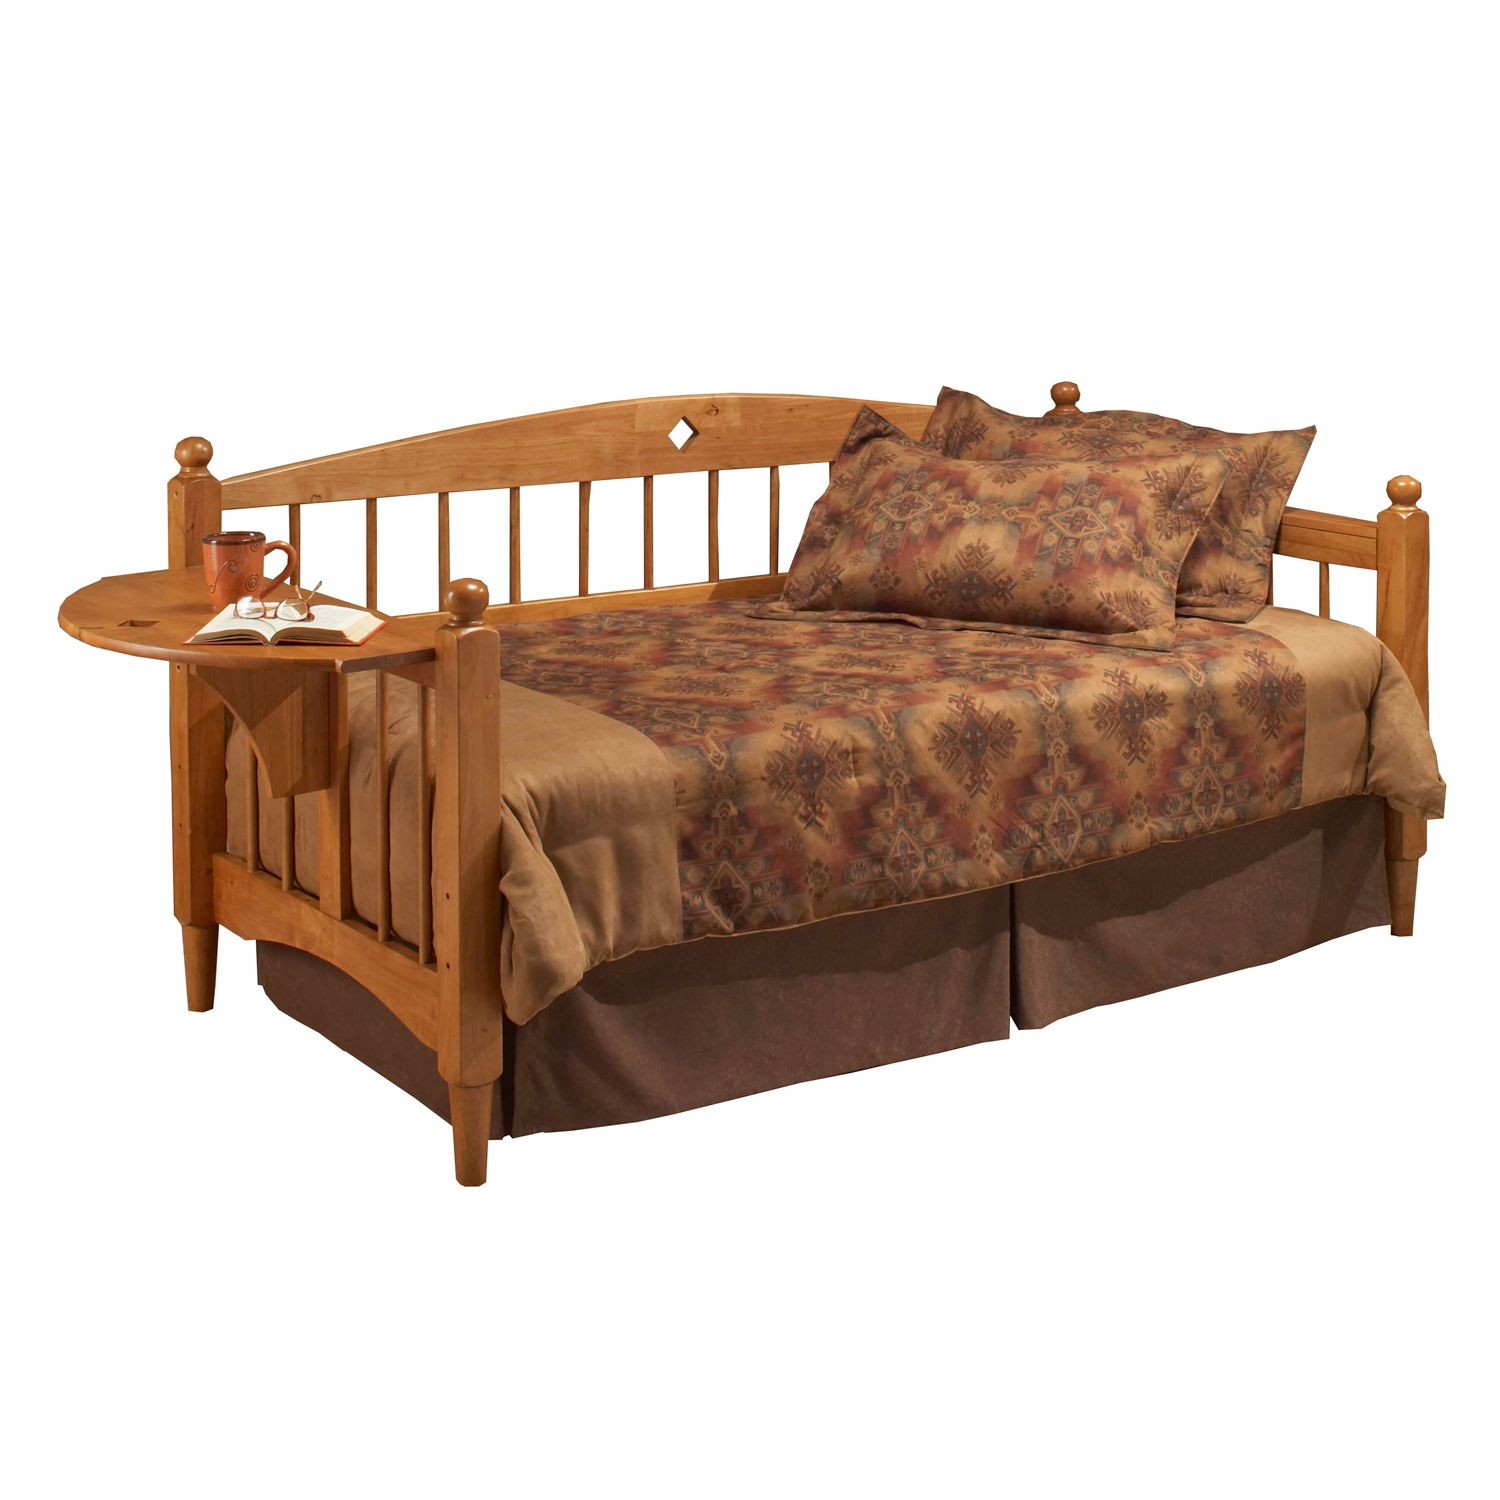 Image for Hillsdale Furniture Dalton Daybed at Kohl's.